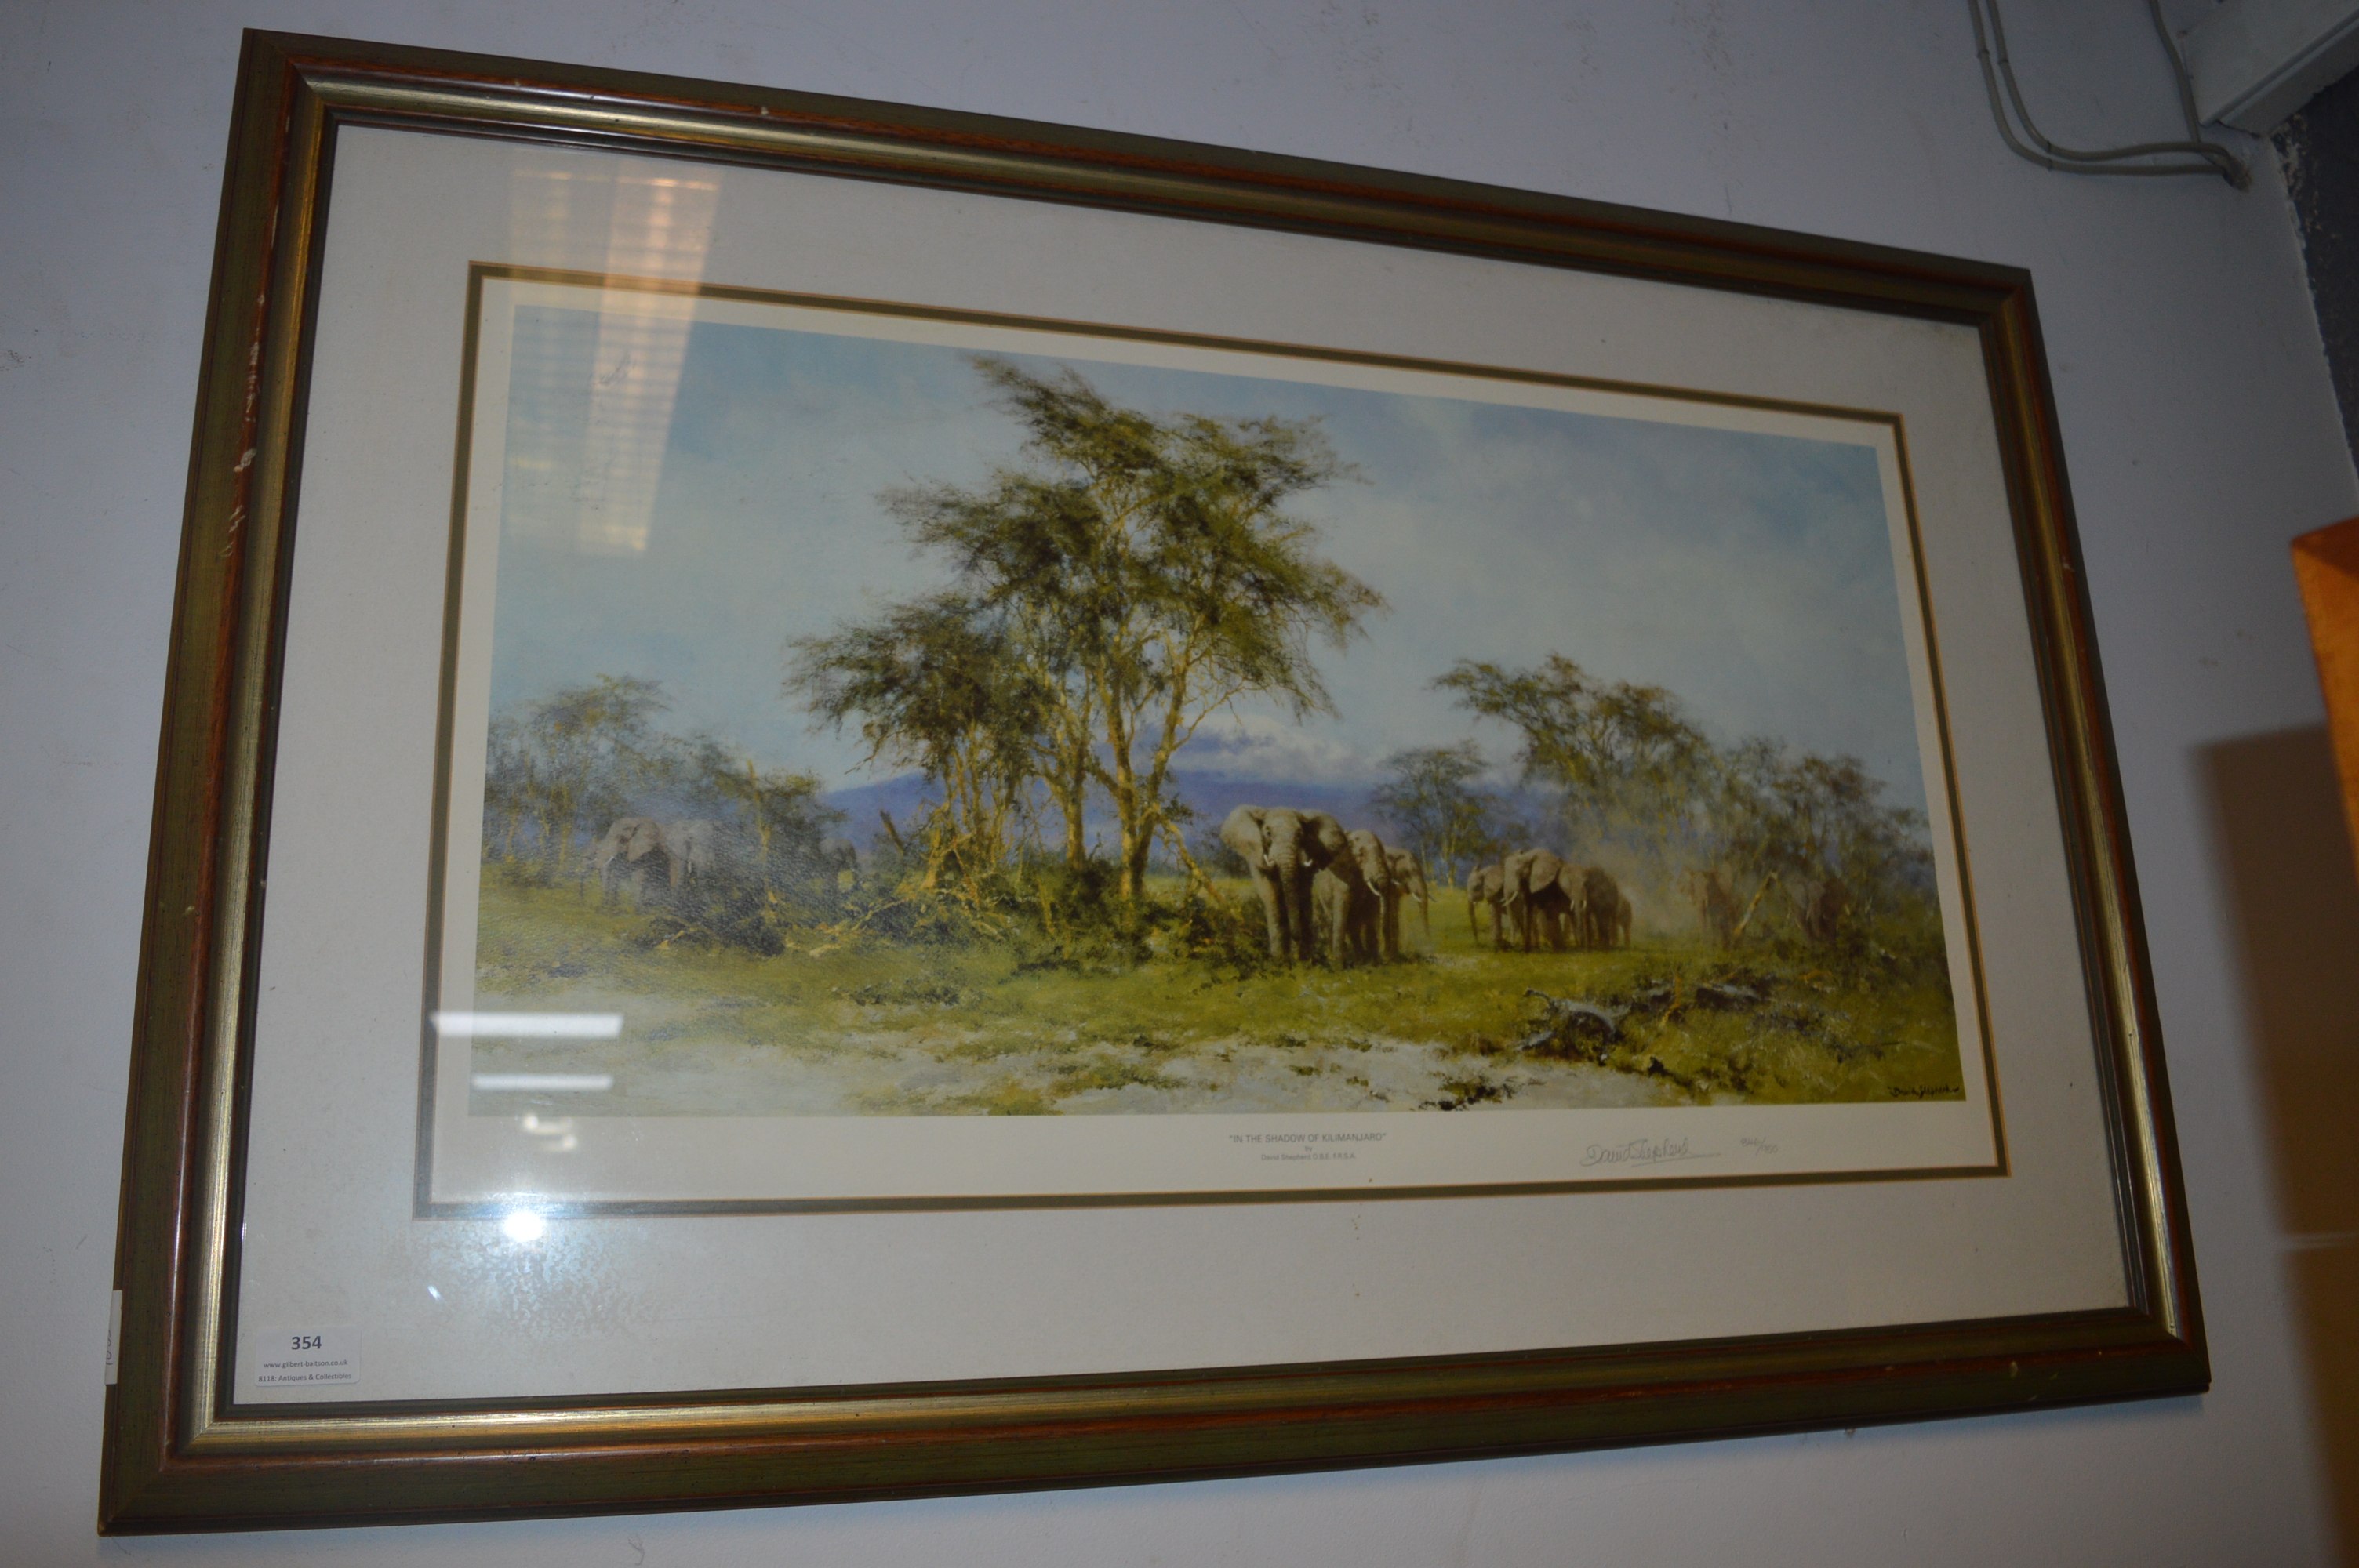 Signed Print by David Shepherd - "In the Shadow of